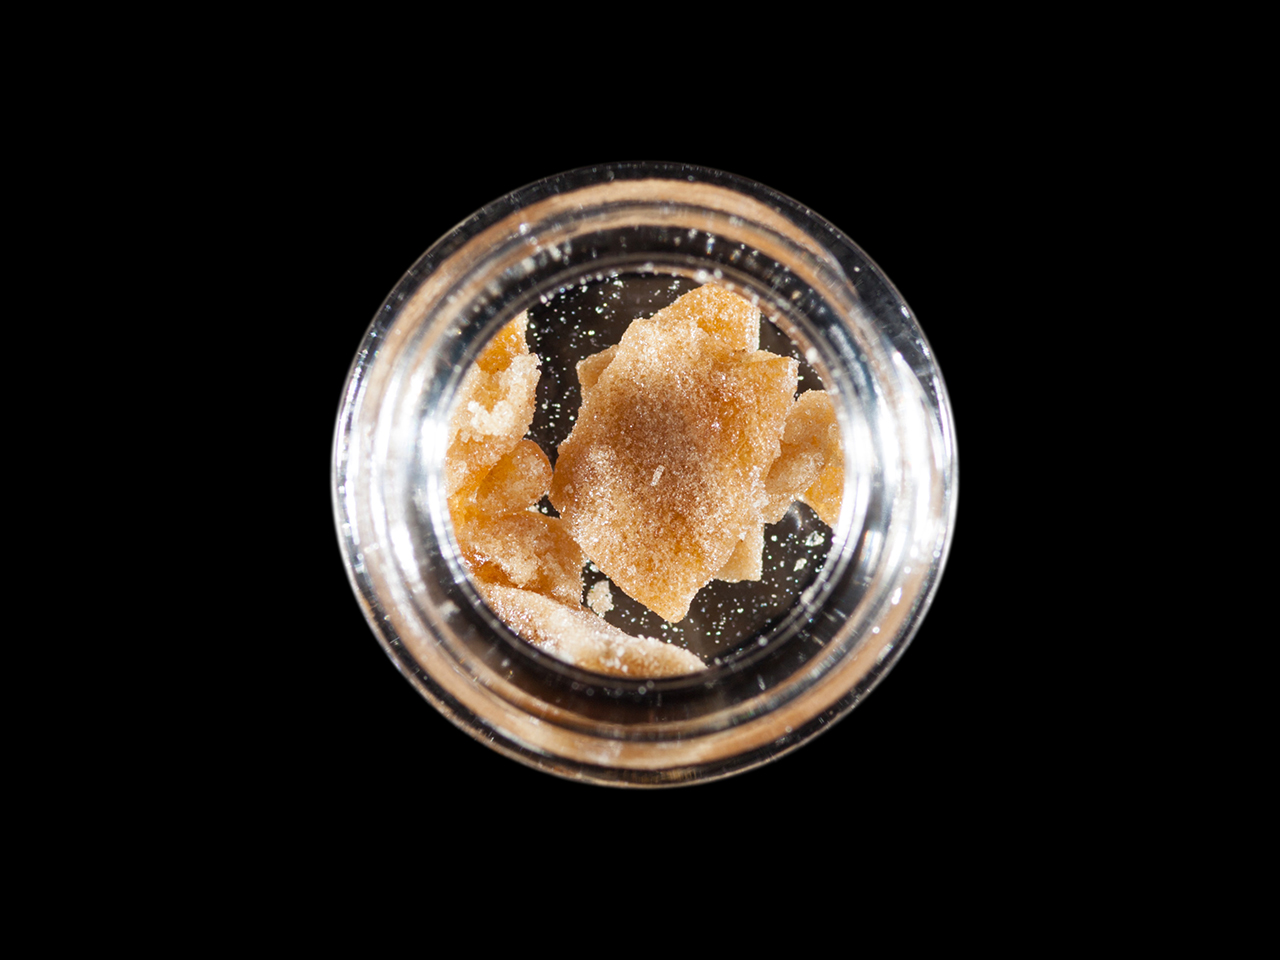 2016 Michigan Medical Cannabis Cup, Top 5 Non-Solvent Hash Entries